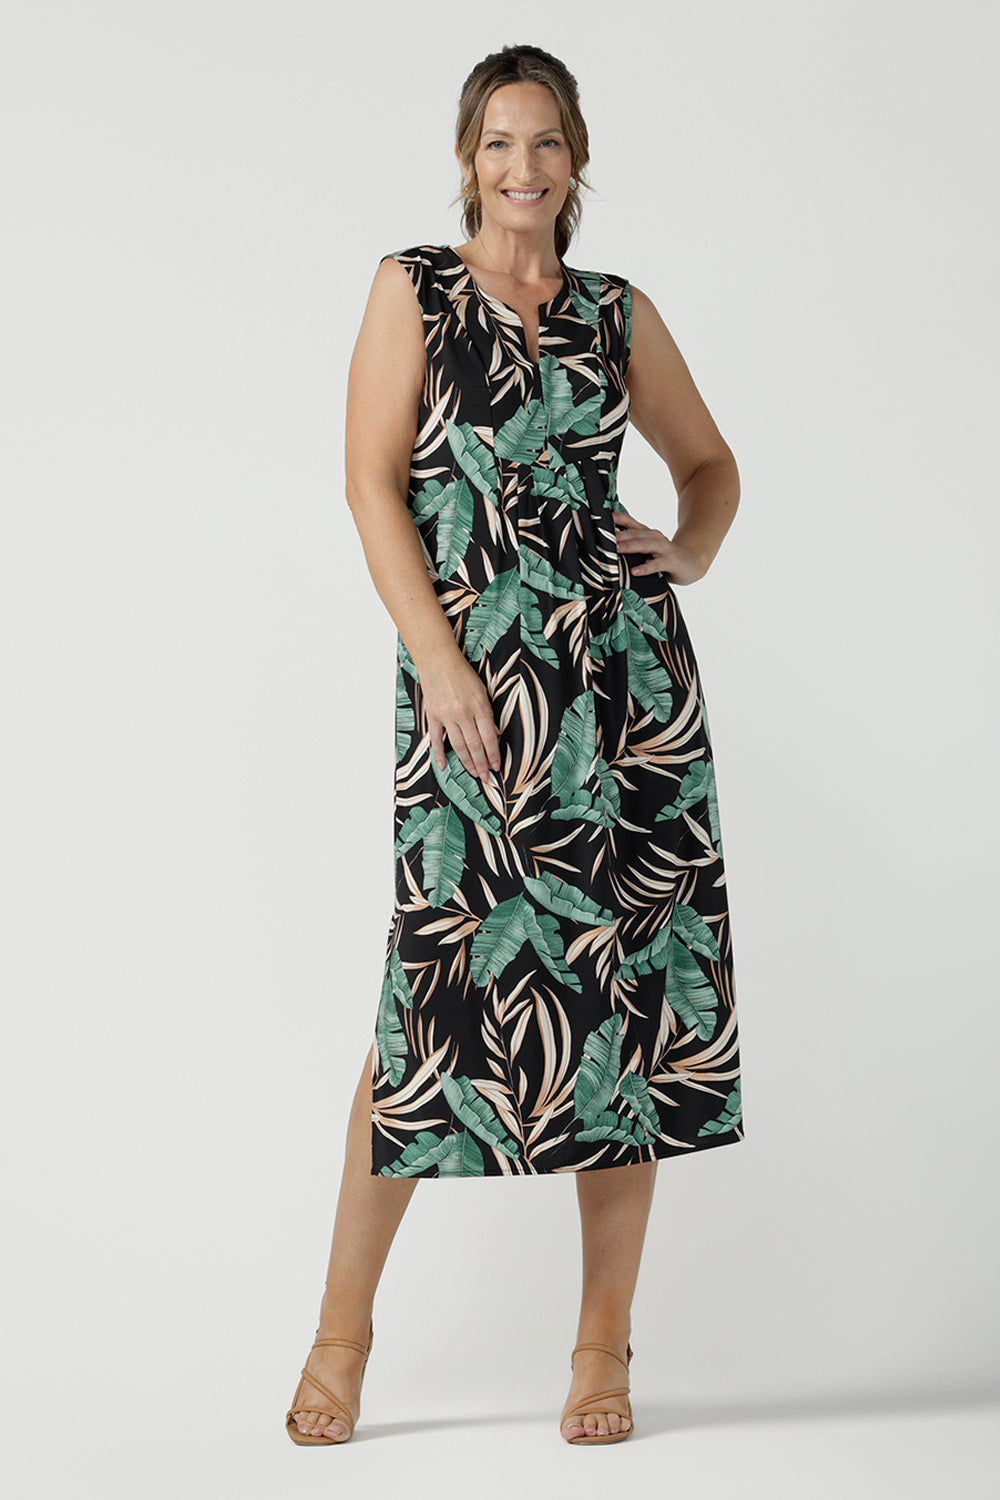 Women's curvy fashion pictured on a size 8. A Tropical printed dress in a sleeveless design with pleated front and v-neckline. Australian made in size 8 - 24. 